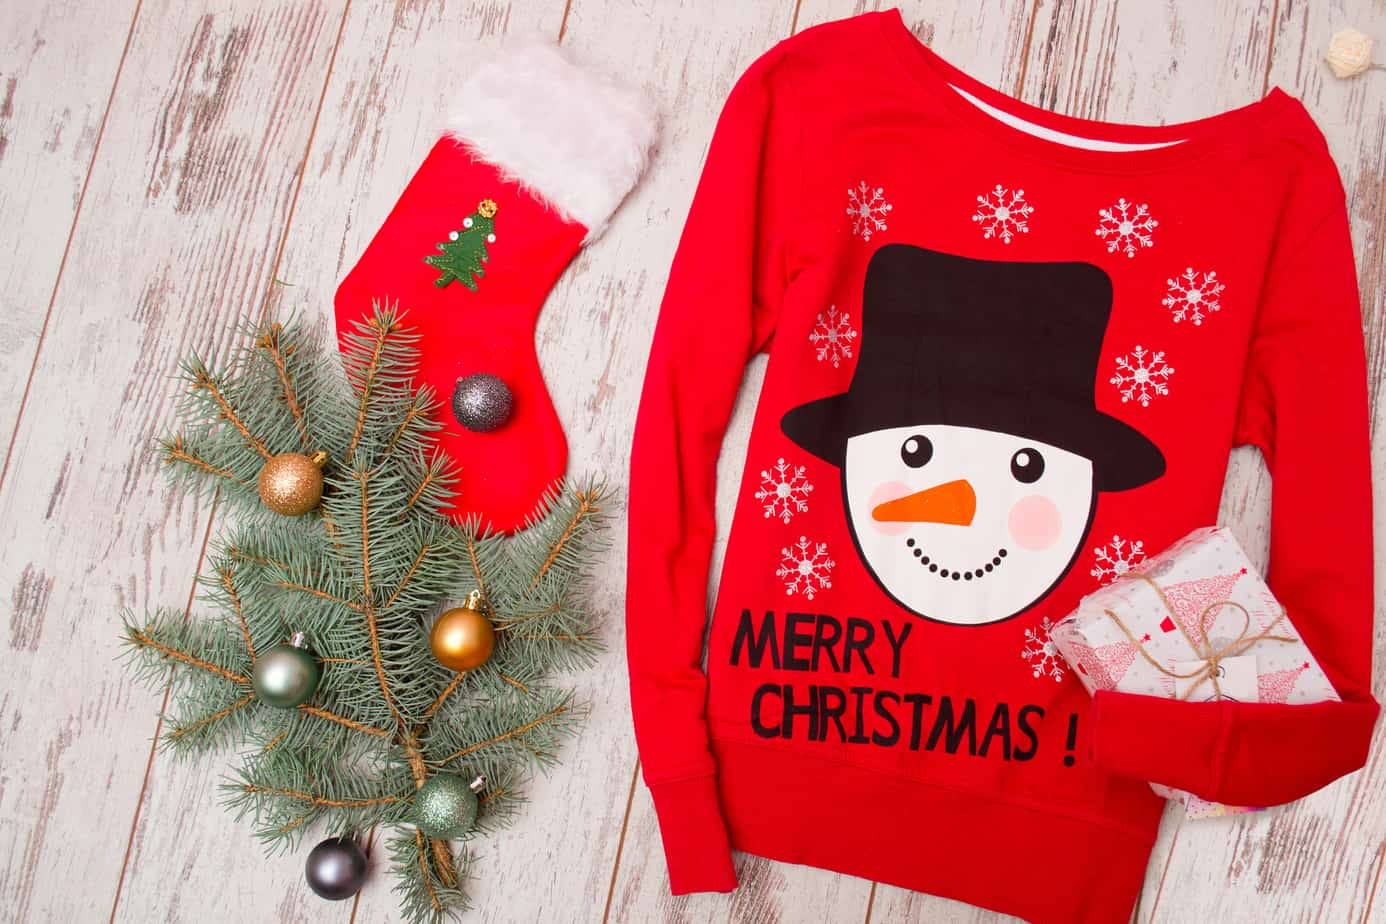 If you need to make some extra money for Christmas, here are 9 amazingly cute things to make and sell at home for extra cash. Put your diy skills to the test and earn holiday shopping money!